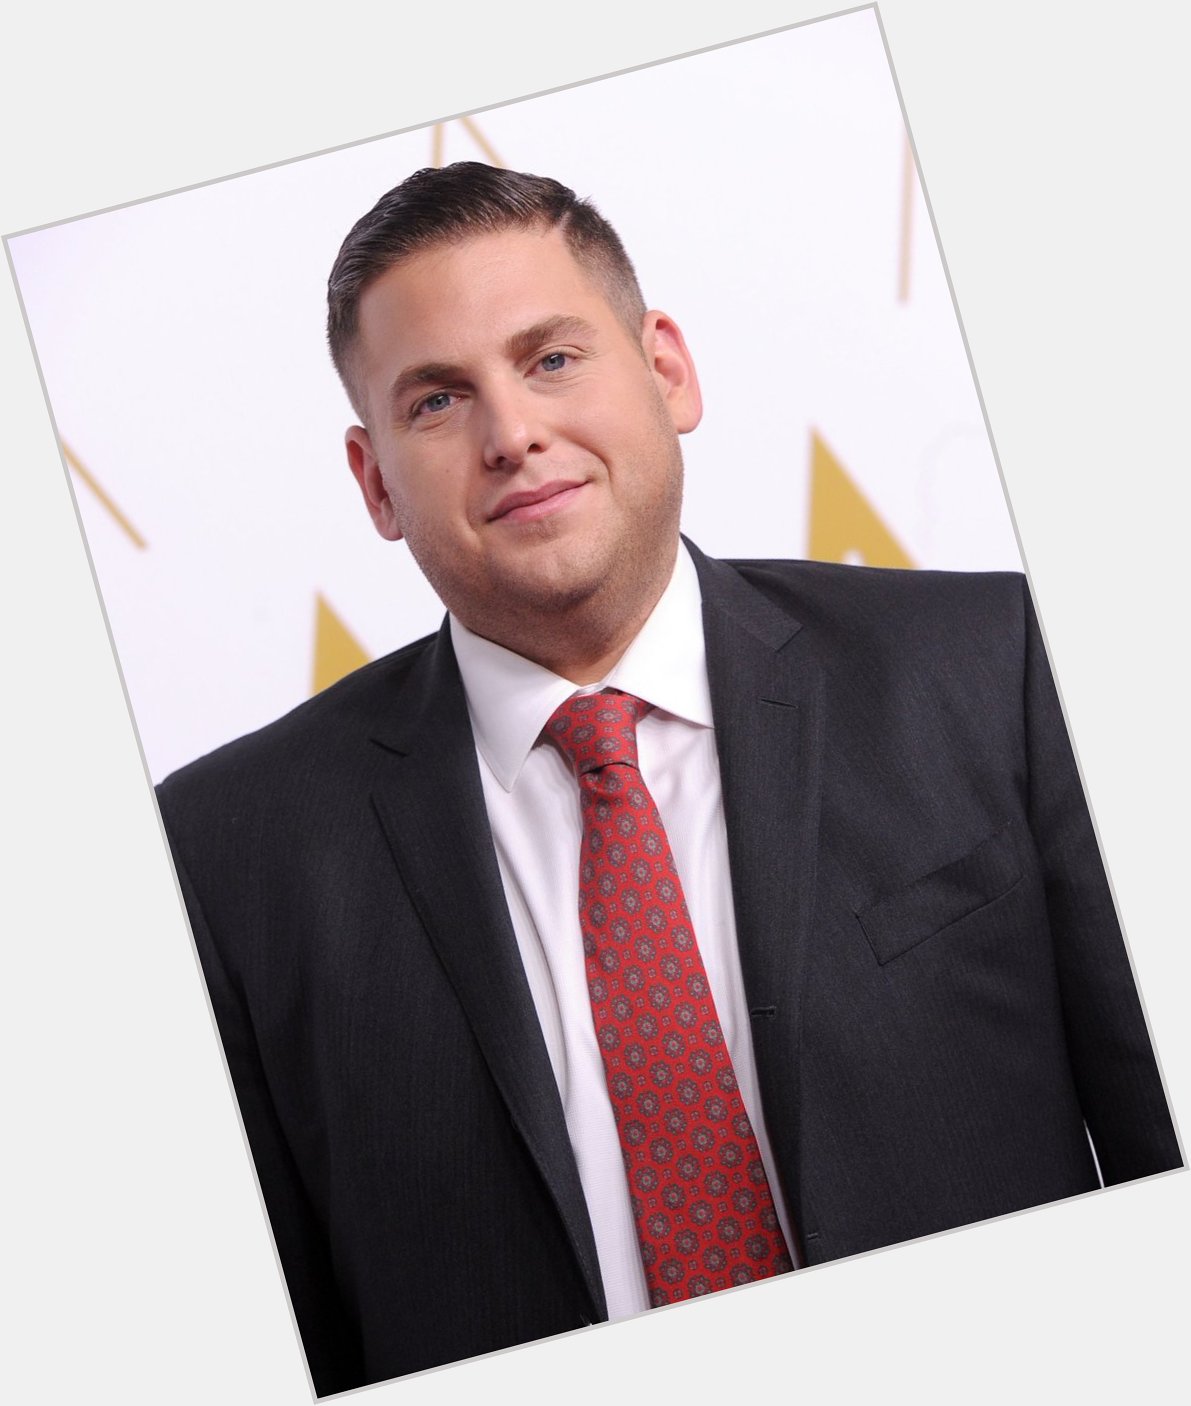 Happy birthday to this funny and talented actor, Jonah Hill! 